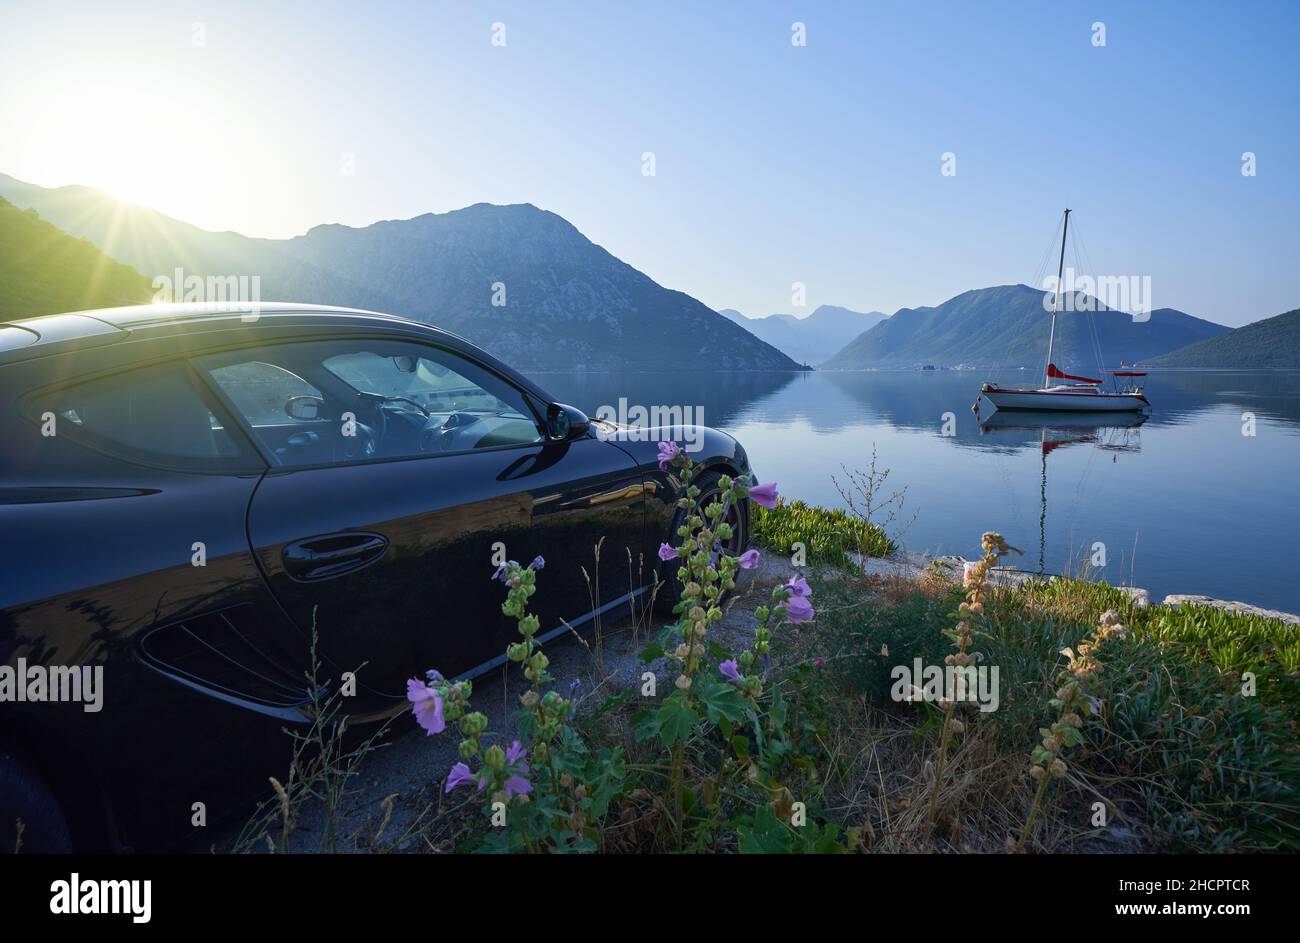 Sports car by the sea with mountain views, morning seascape with car. Stock Photo